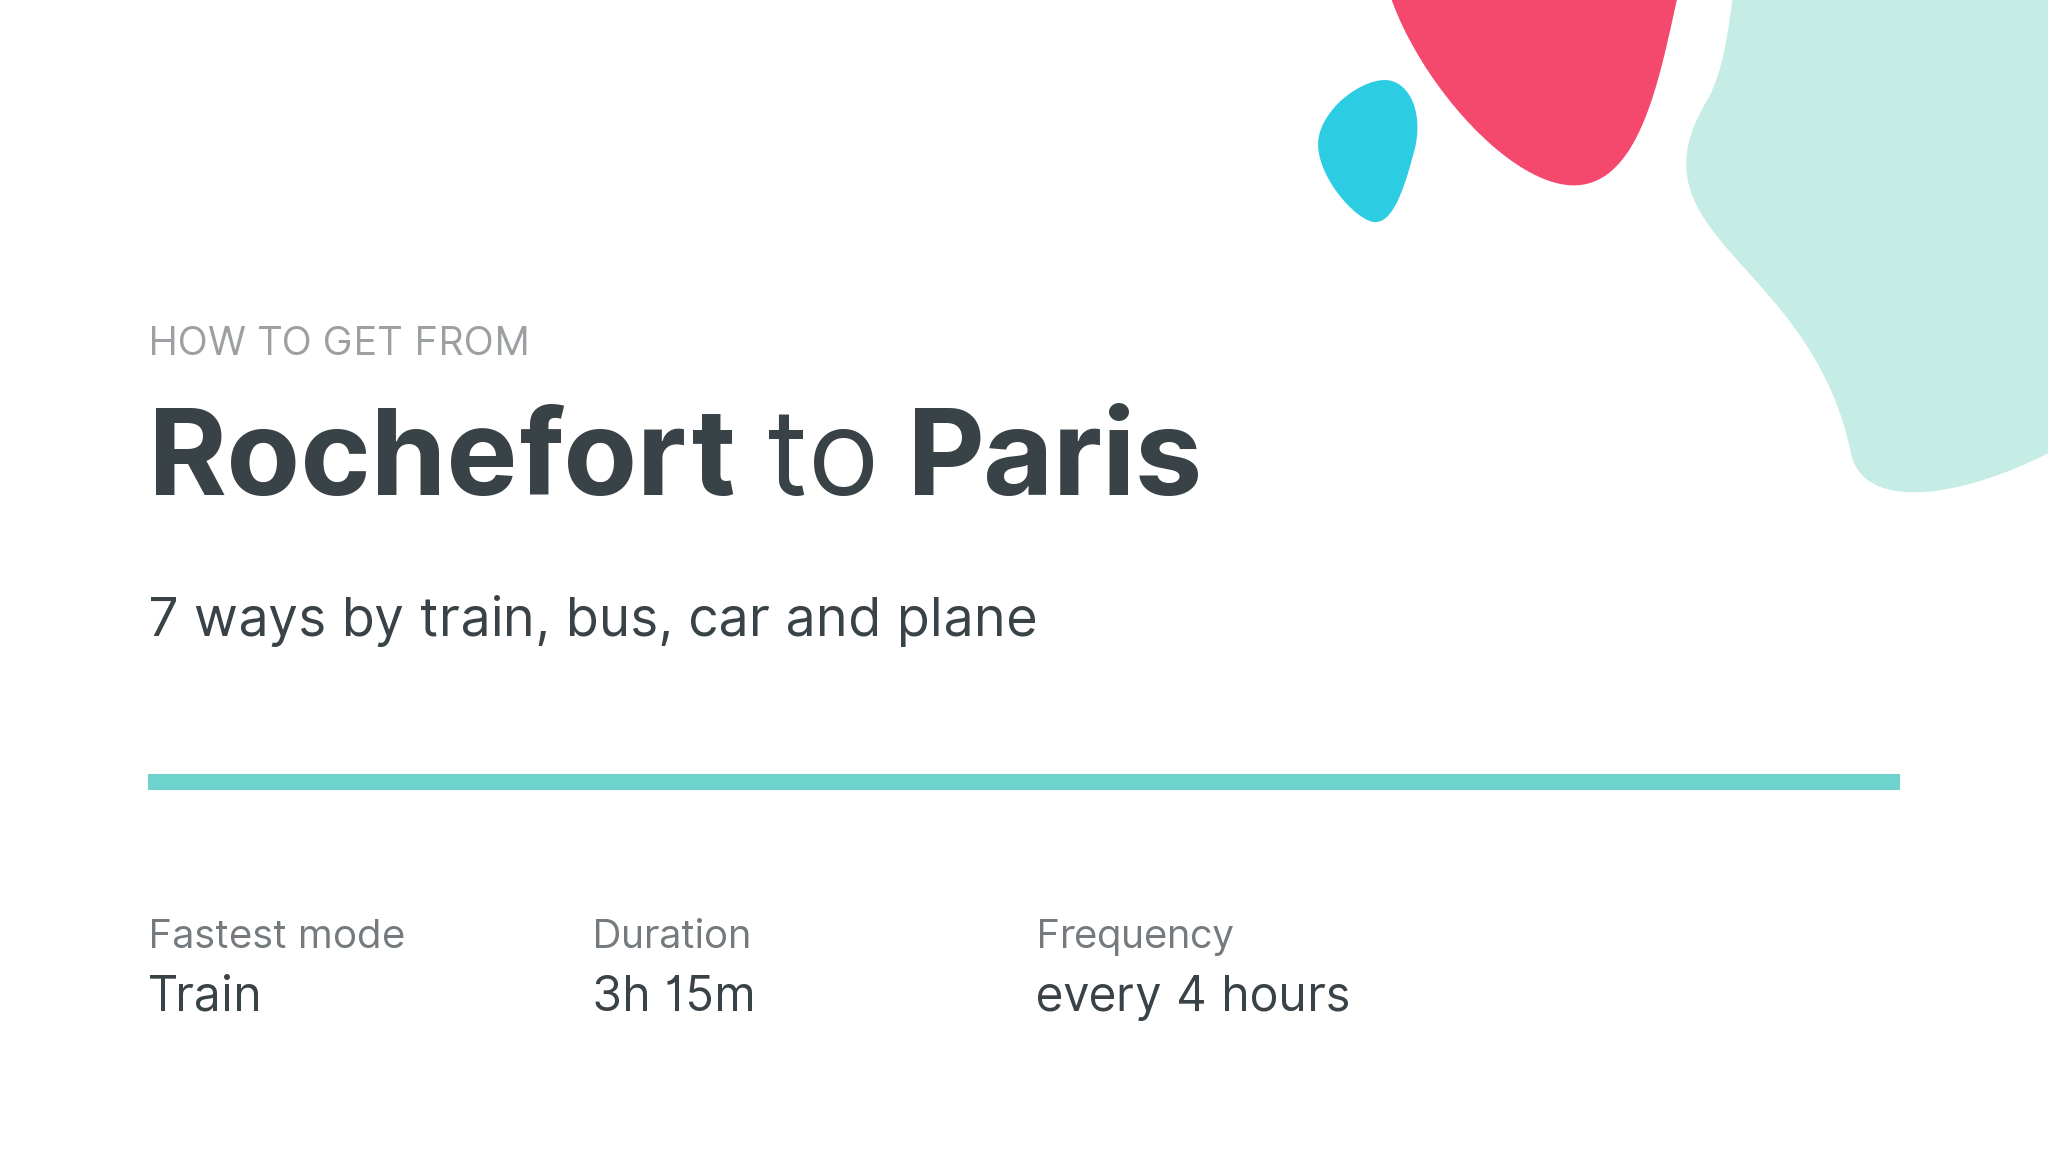 How do I get from Rochefort to Paris